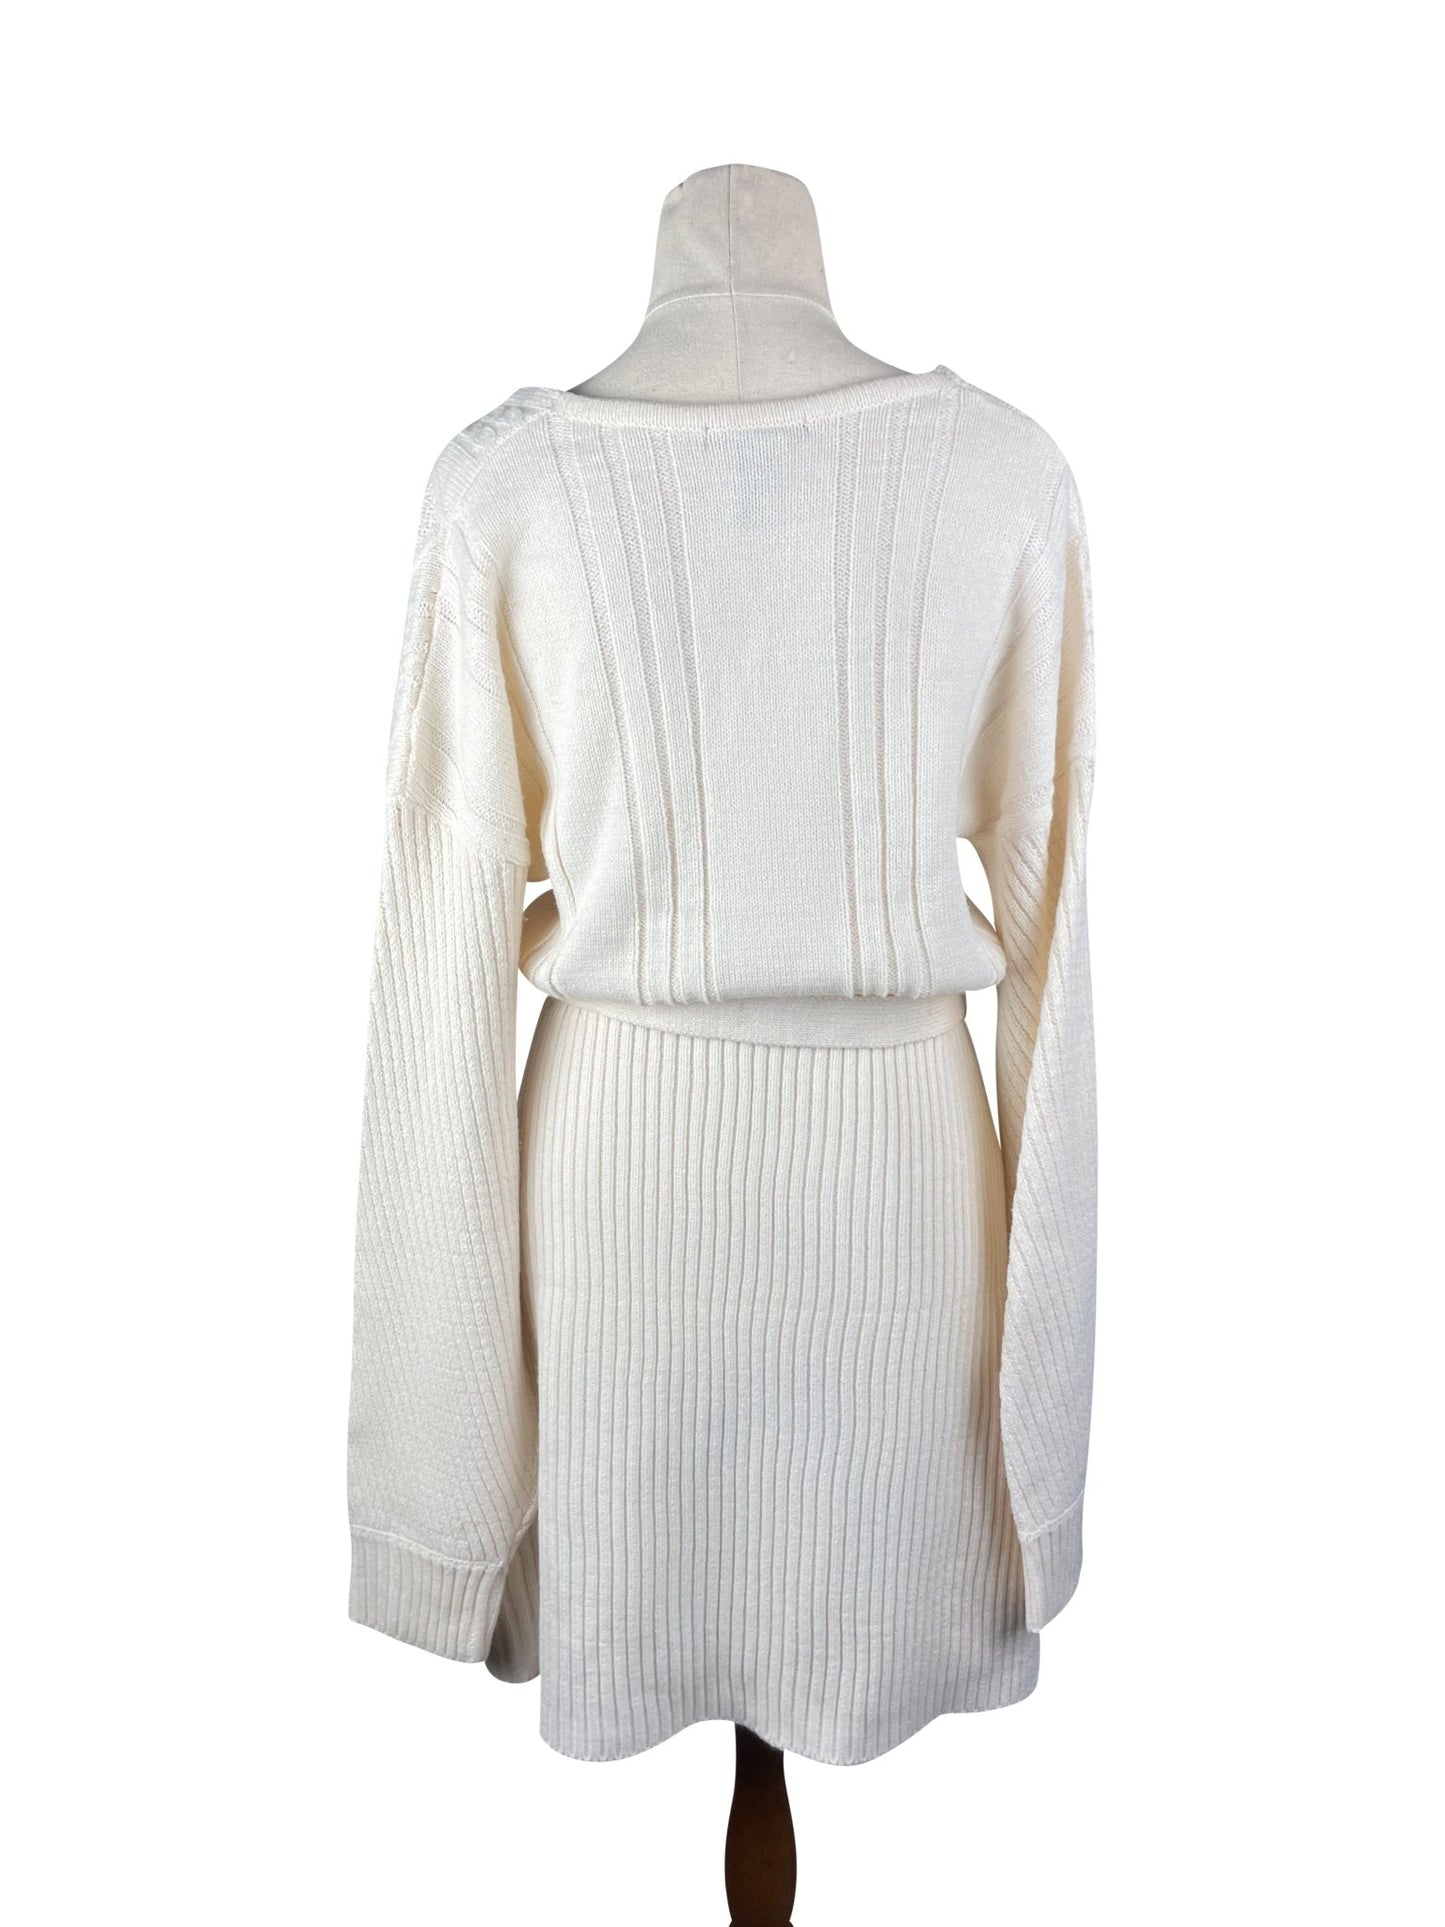 Forever 21 cream knit wrap dress | size 12-14